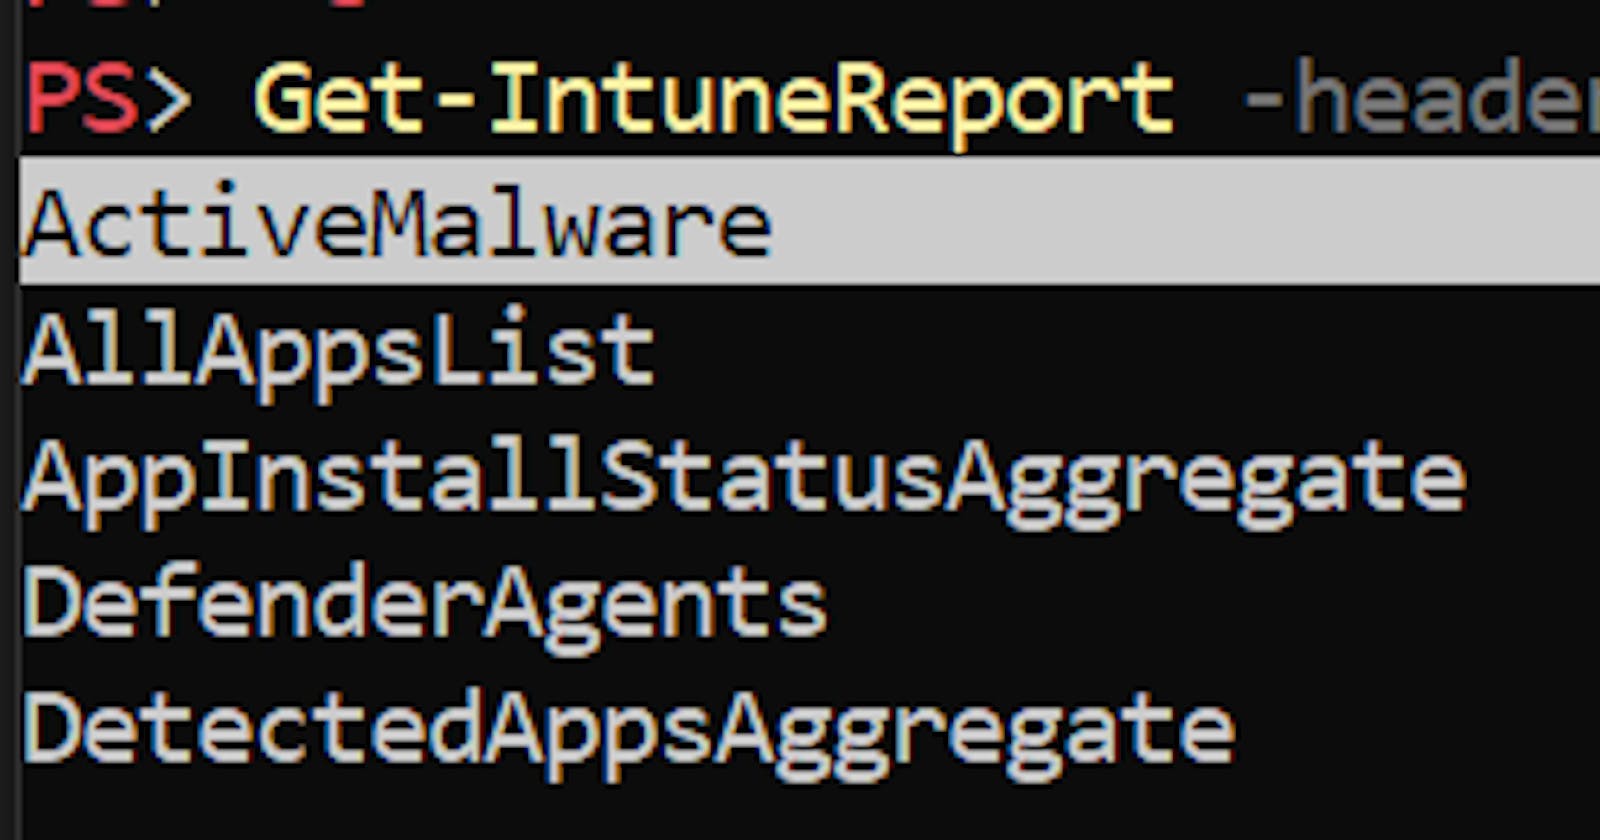 Get Intune Reports using PowerShell leveraging Graph API